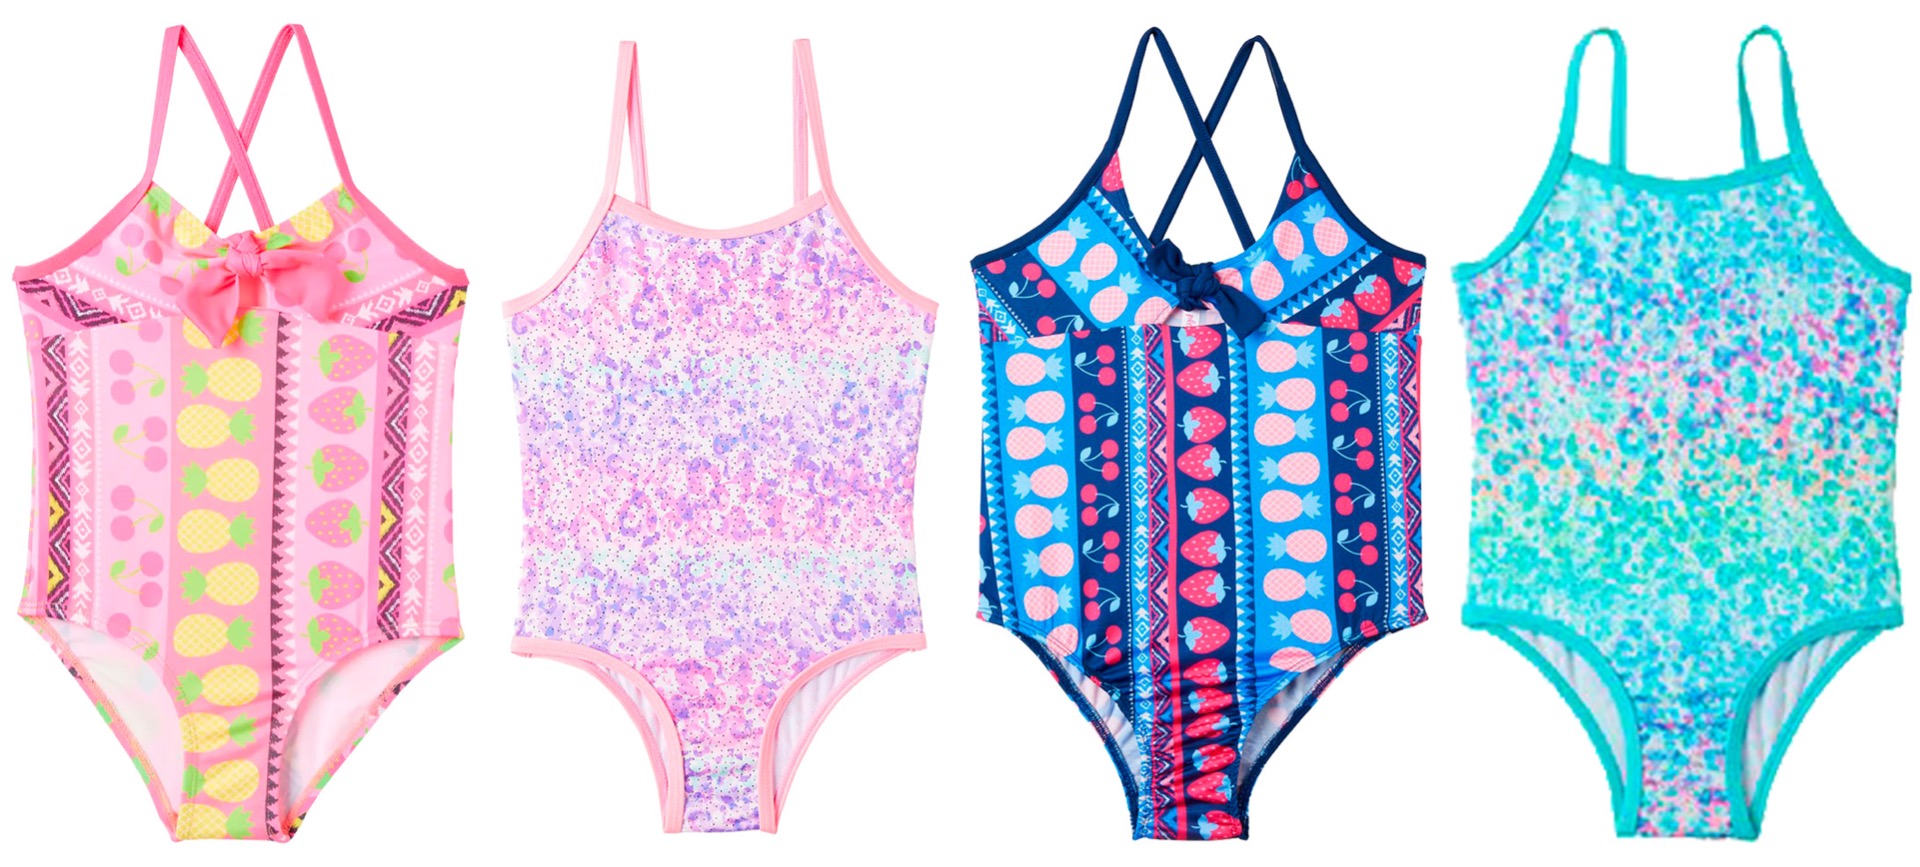 ''Toddler Girl's Printed One-Piece Swimsuits - Tribal, Tropical Fruit, & Ombre Sparkle Print - Sizes 